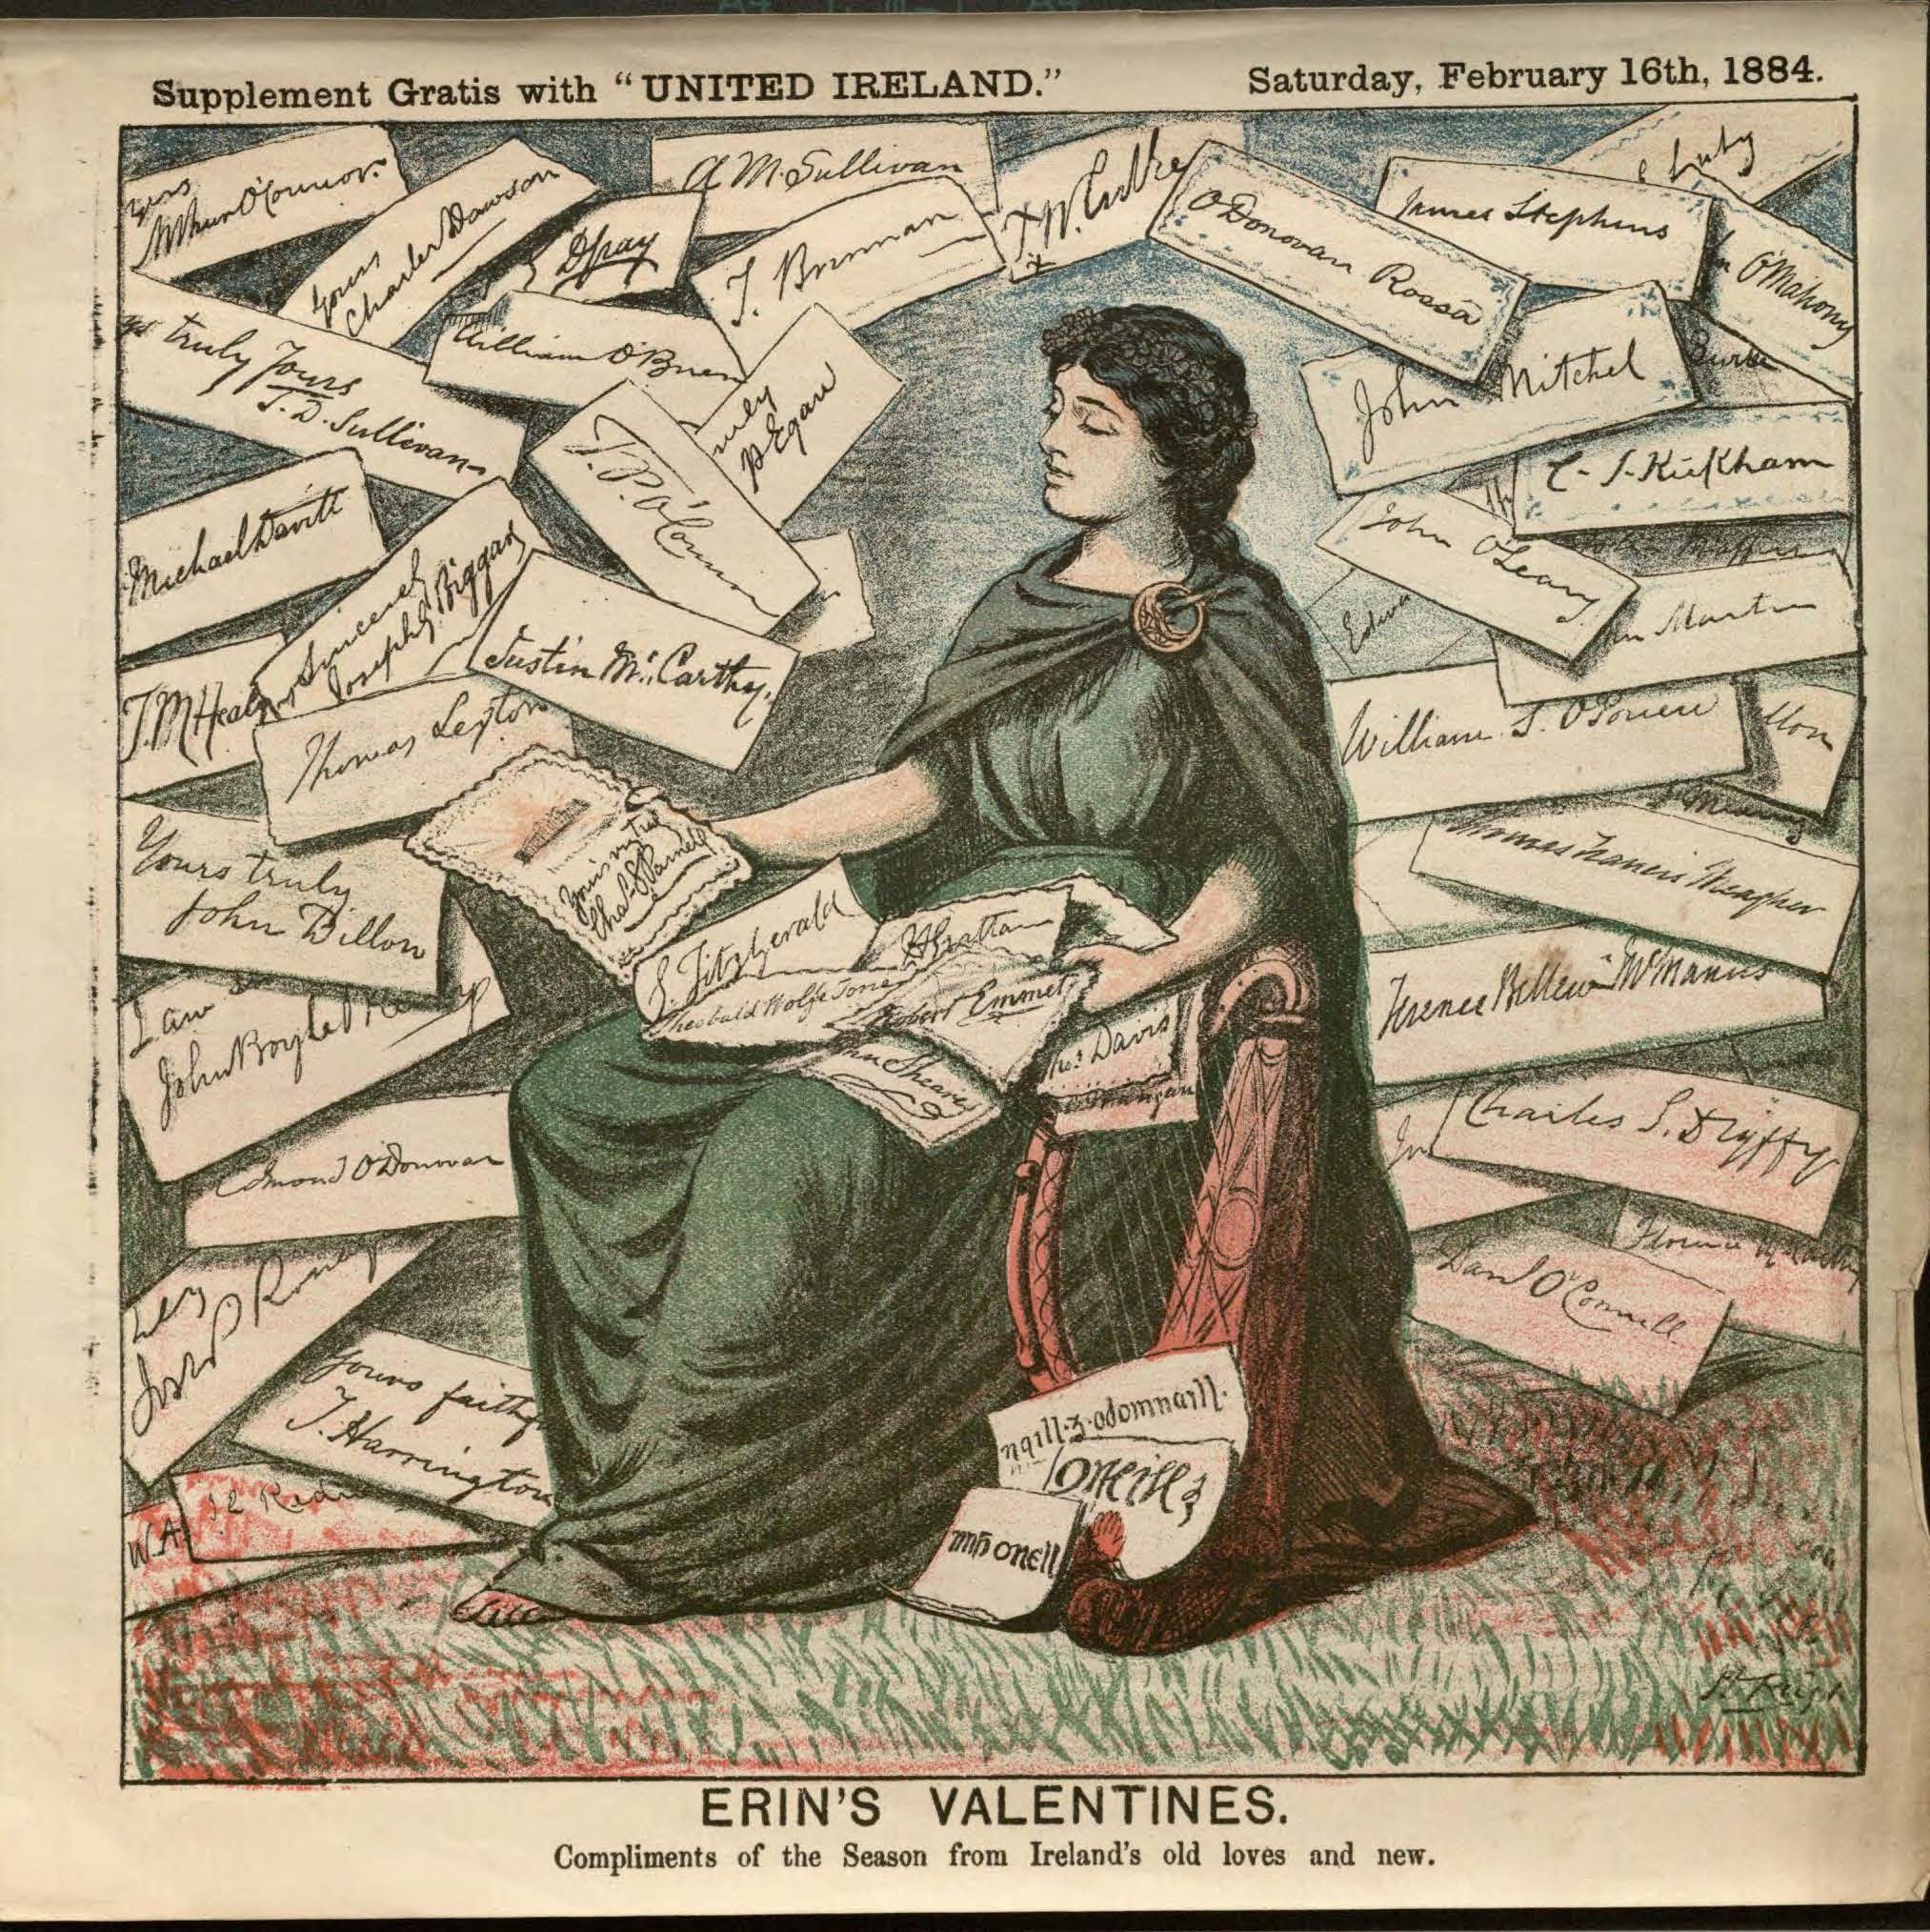 2026x2028 Image of Color Supplement from United Ireland, Cartoon featuring valentines  to Erin (Ireland)